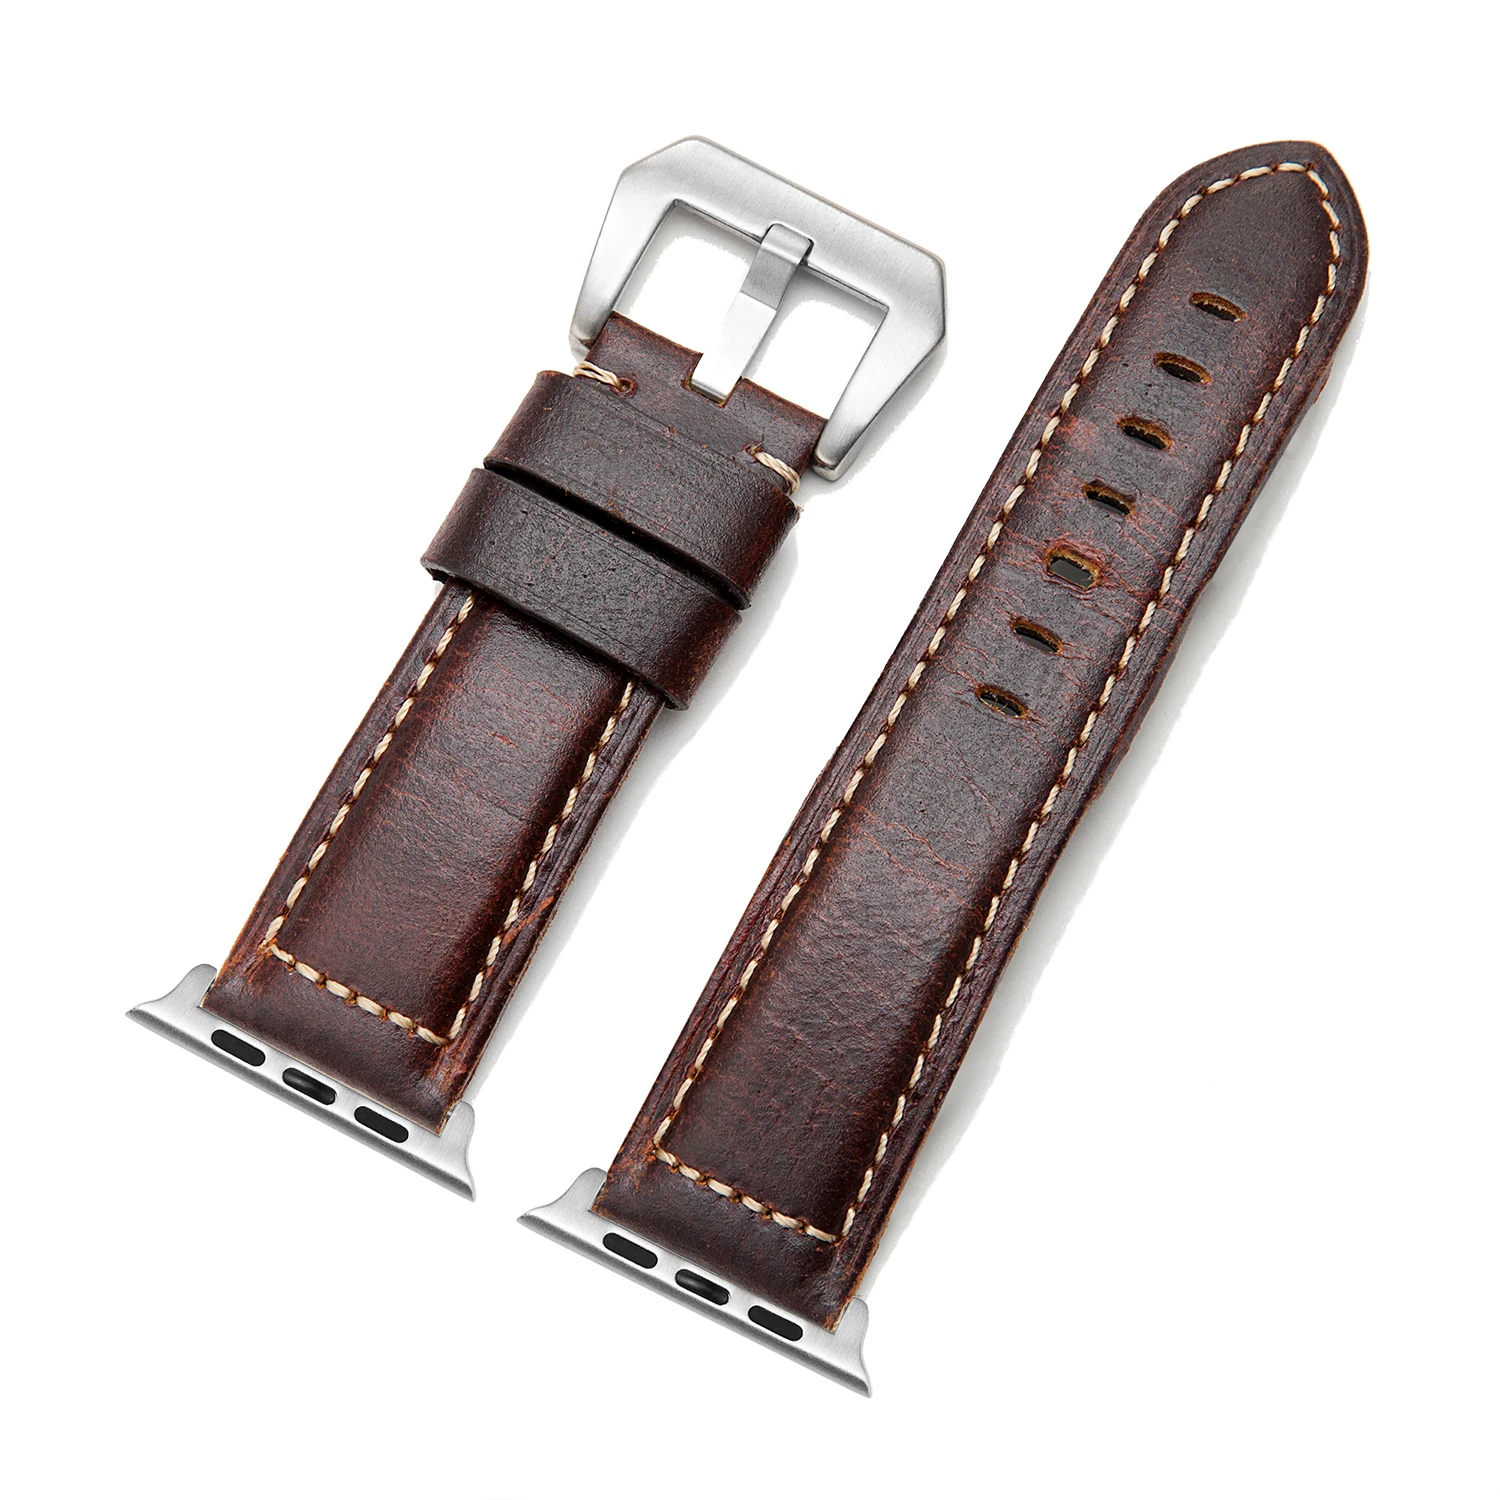 Nomad Horween Leather Strap.